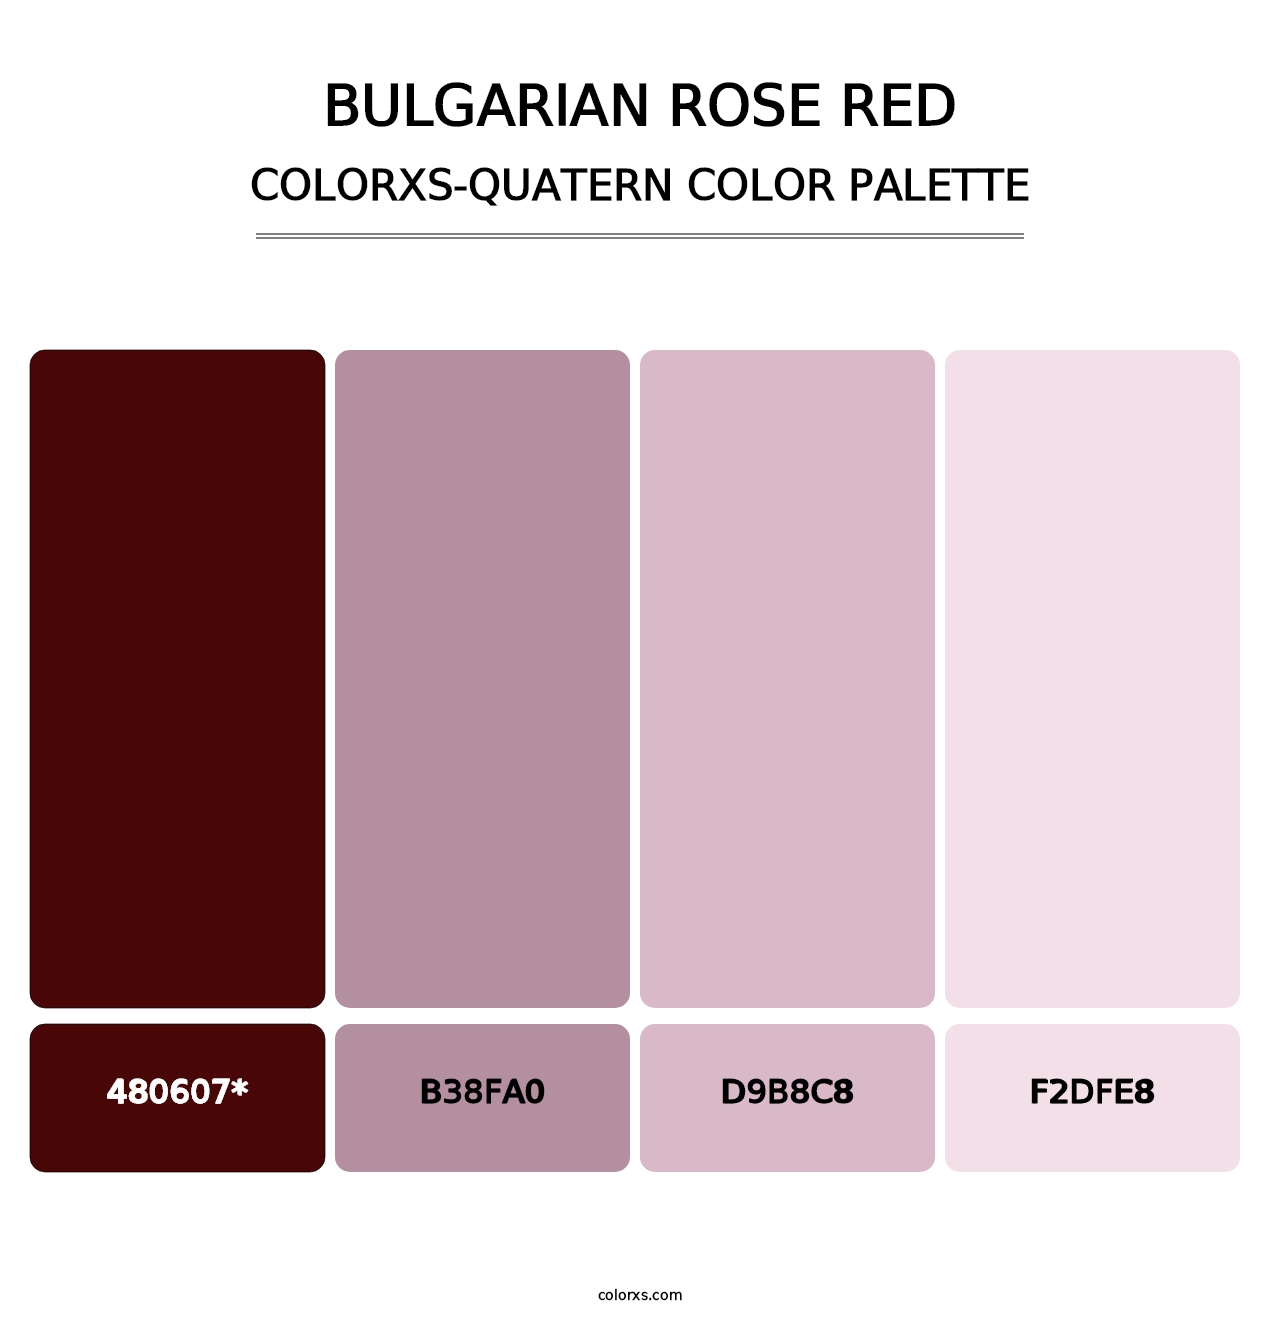 Bulgarian Rose Red - Colorxs Quatern Palette